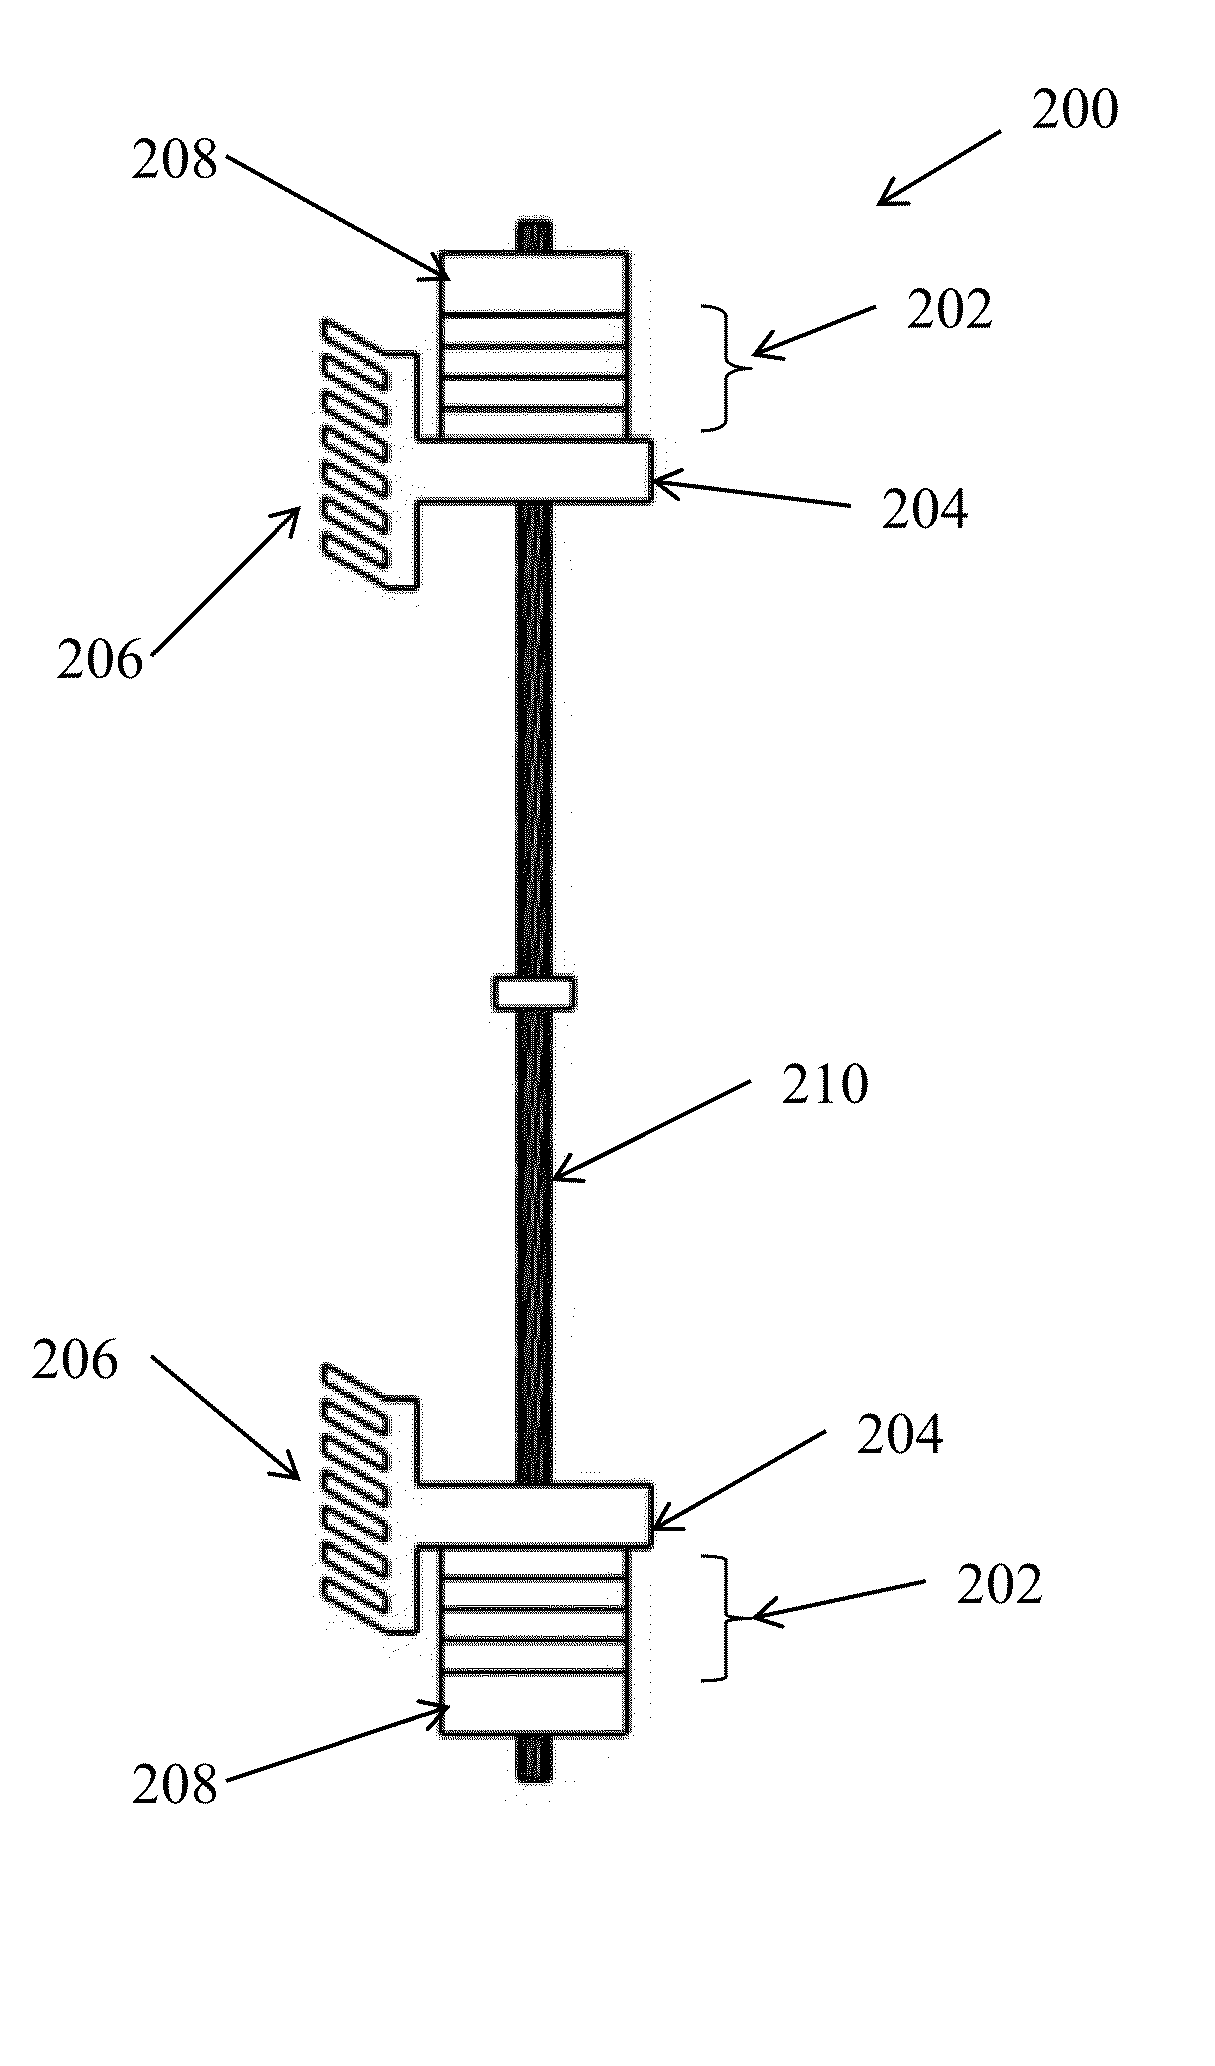 Energy Harvesting From Input Impulse With Motion Doubling Mechanism For Generating Power From Mortar Tube Firing Impulses and Other Inputs